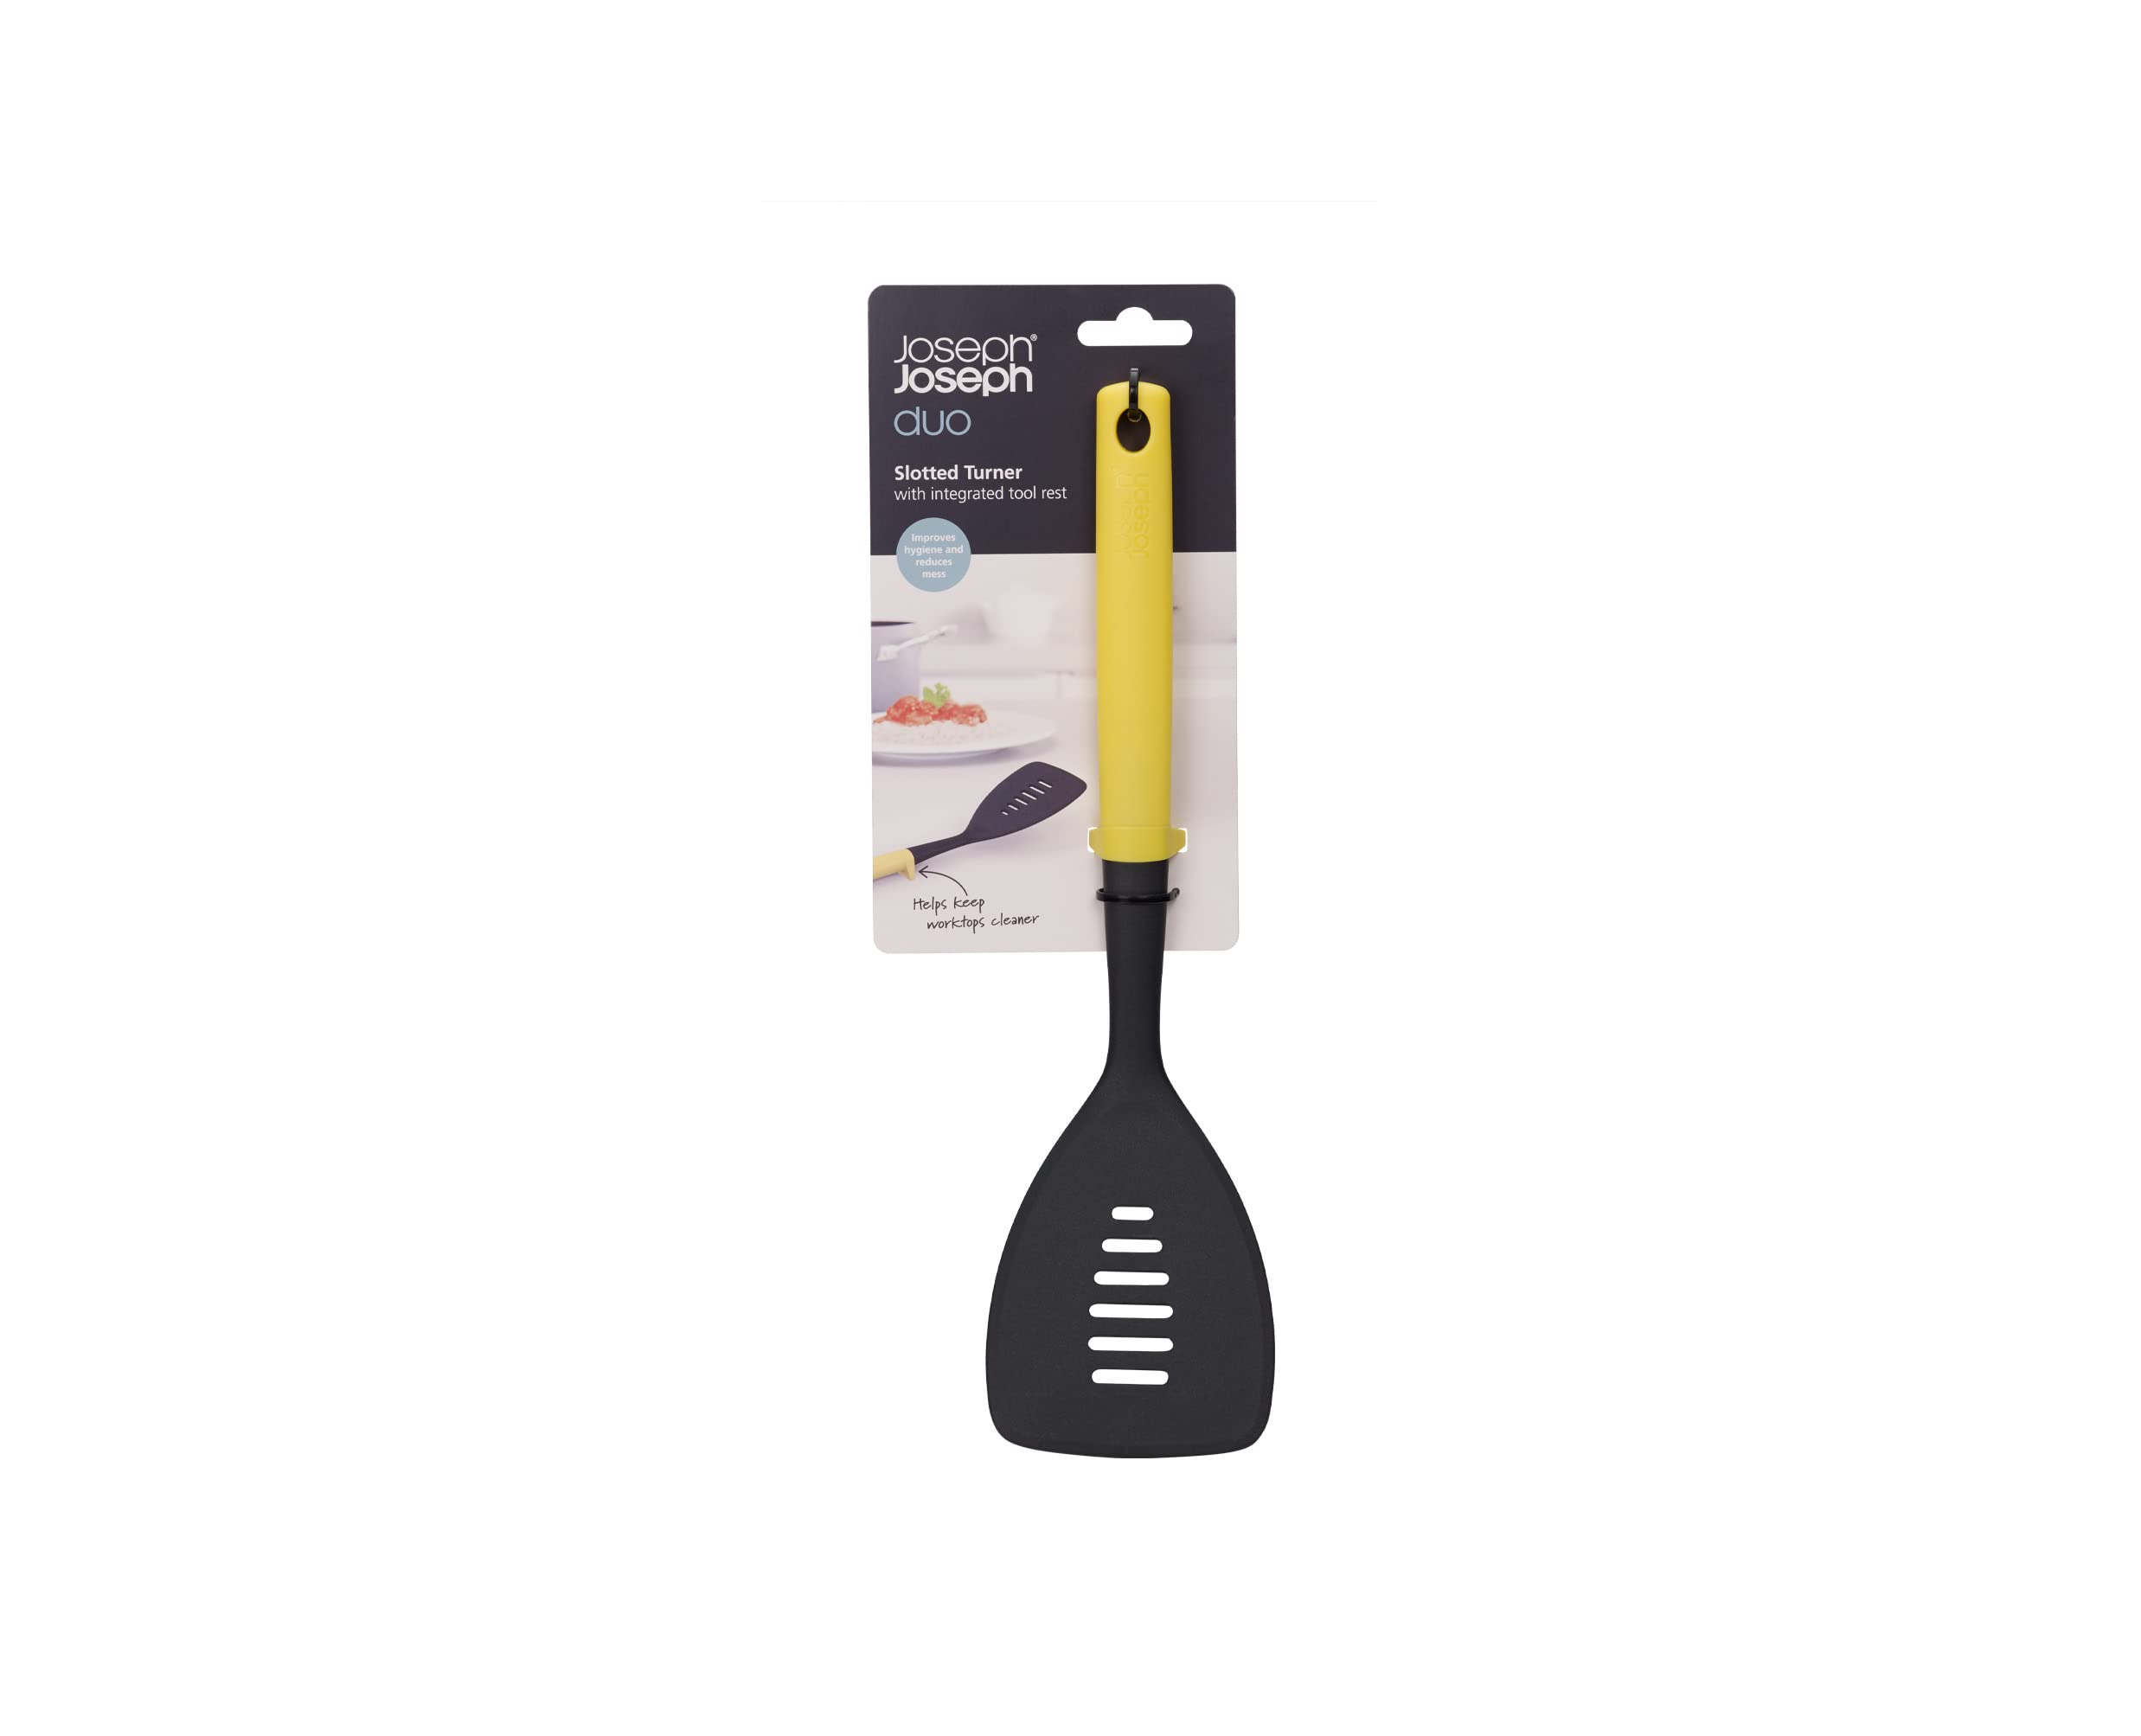 Joseph Joseph Duo Slotted Turner with Integrated Tool Rest: Hygienic, Heat-Resistant Nylon Head, Safe for Non-Stick Cookware, Light Yellow